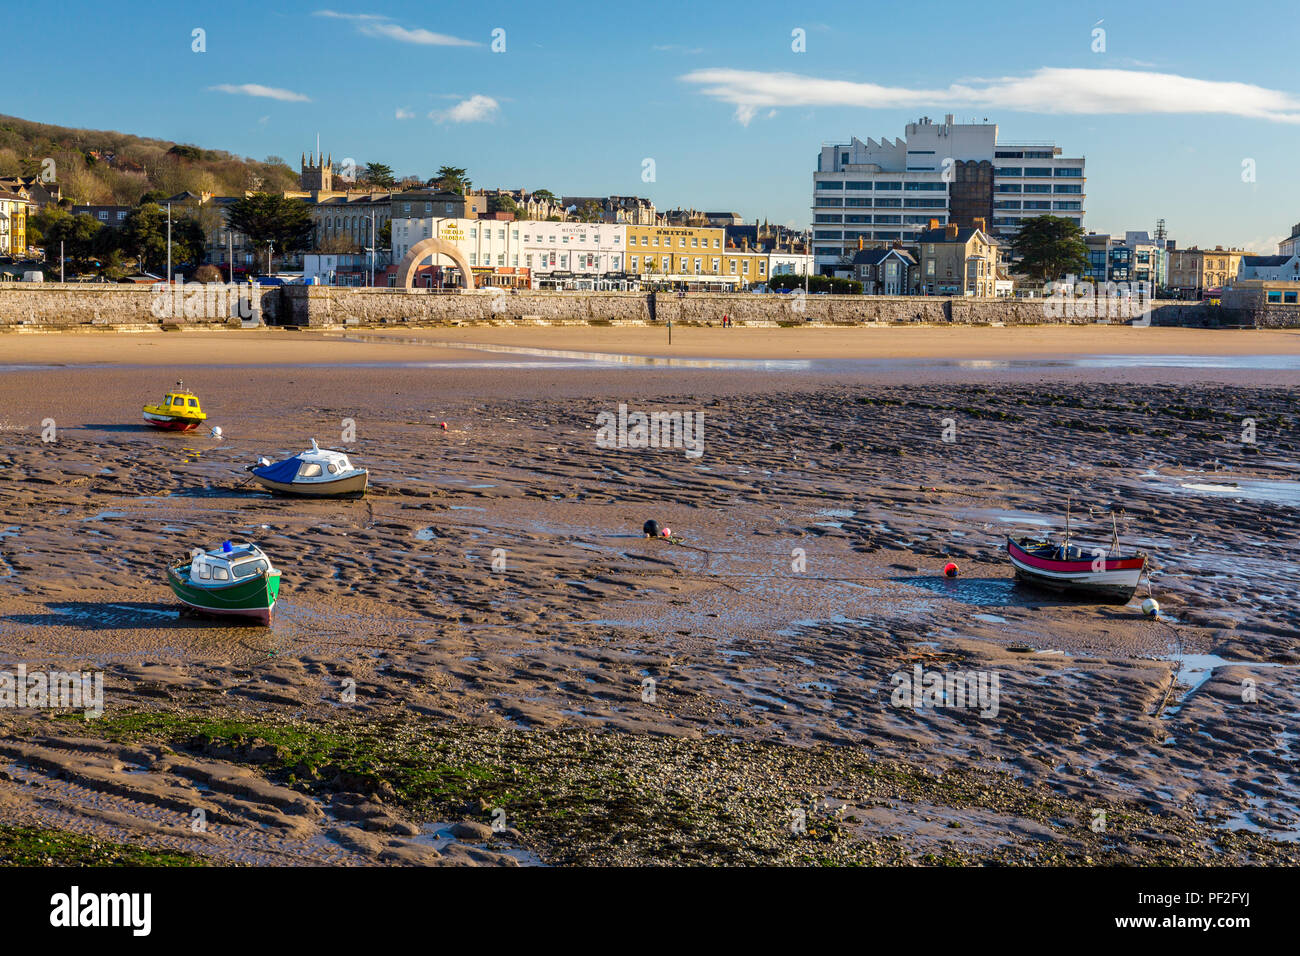 A deserted beach and colourful boats at low tide in winter at Weston-super-Mare, North Somerset, England, UK Stock Photo